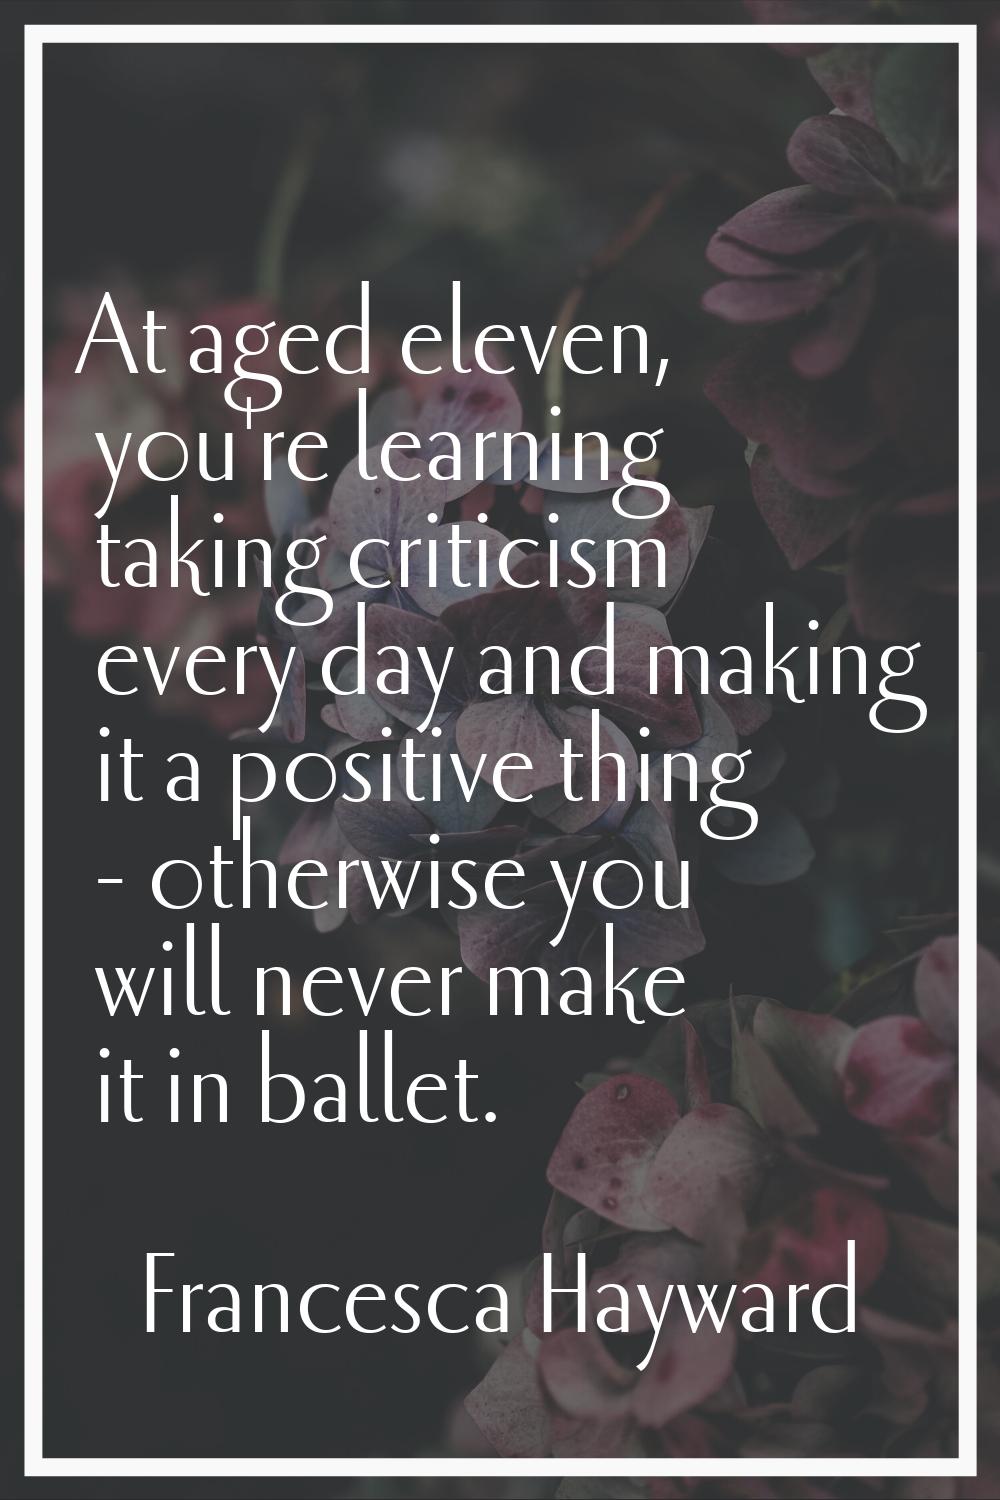 At aged eleven, you're learning taking criticism every day and making it a positive thing - otherwi